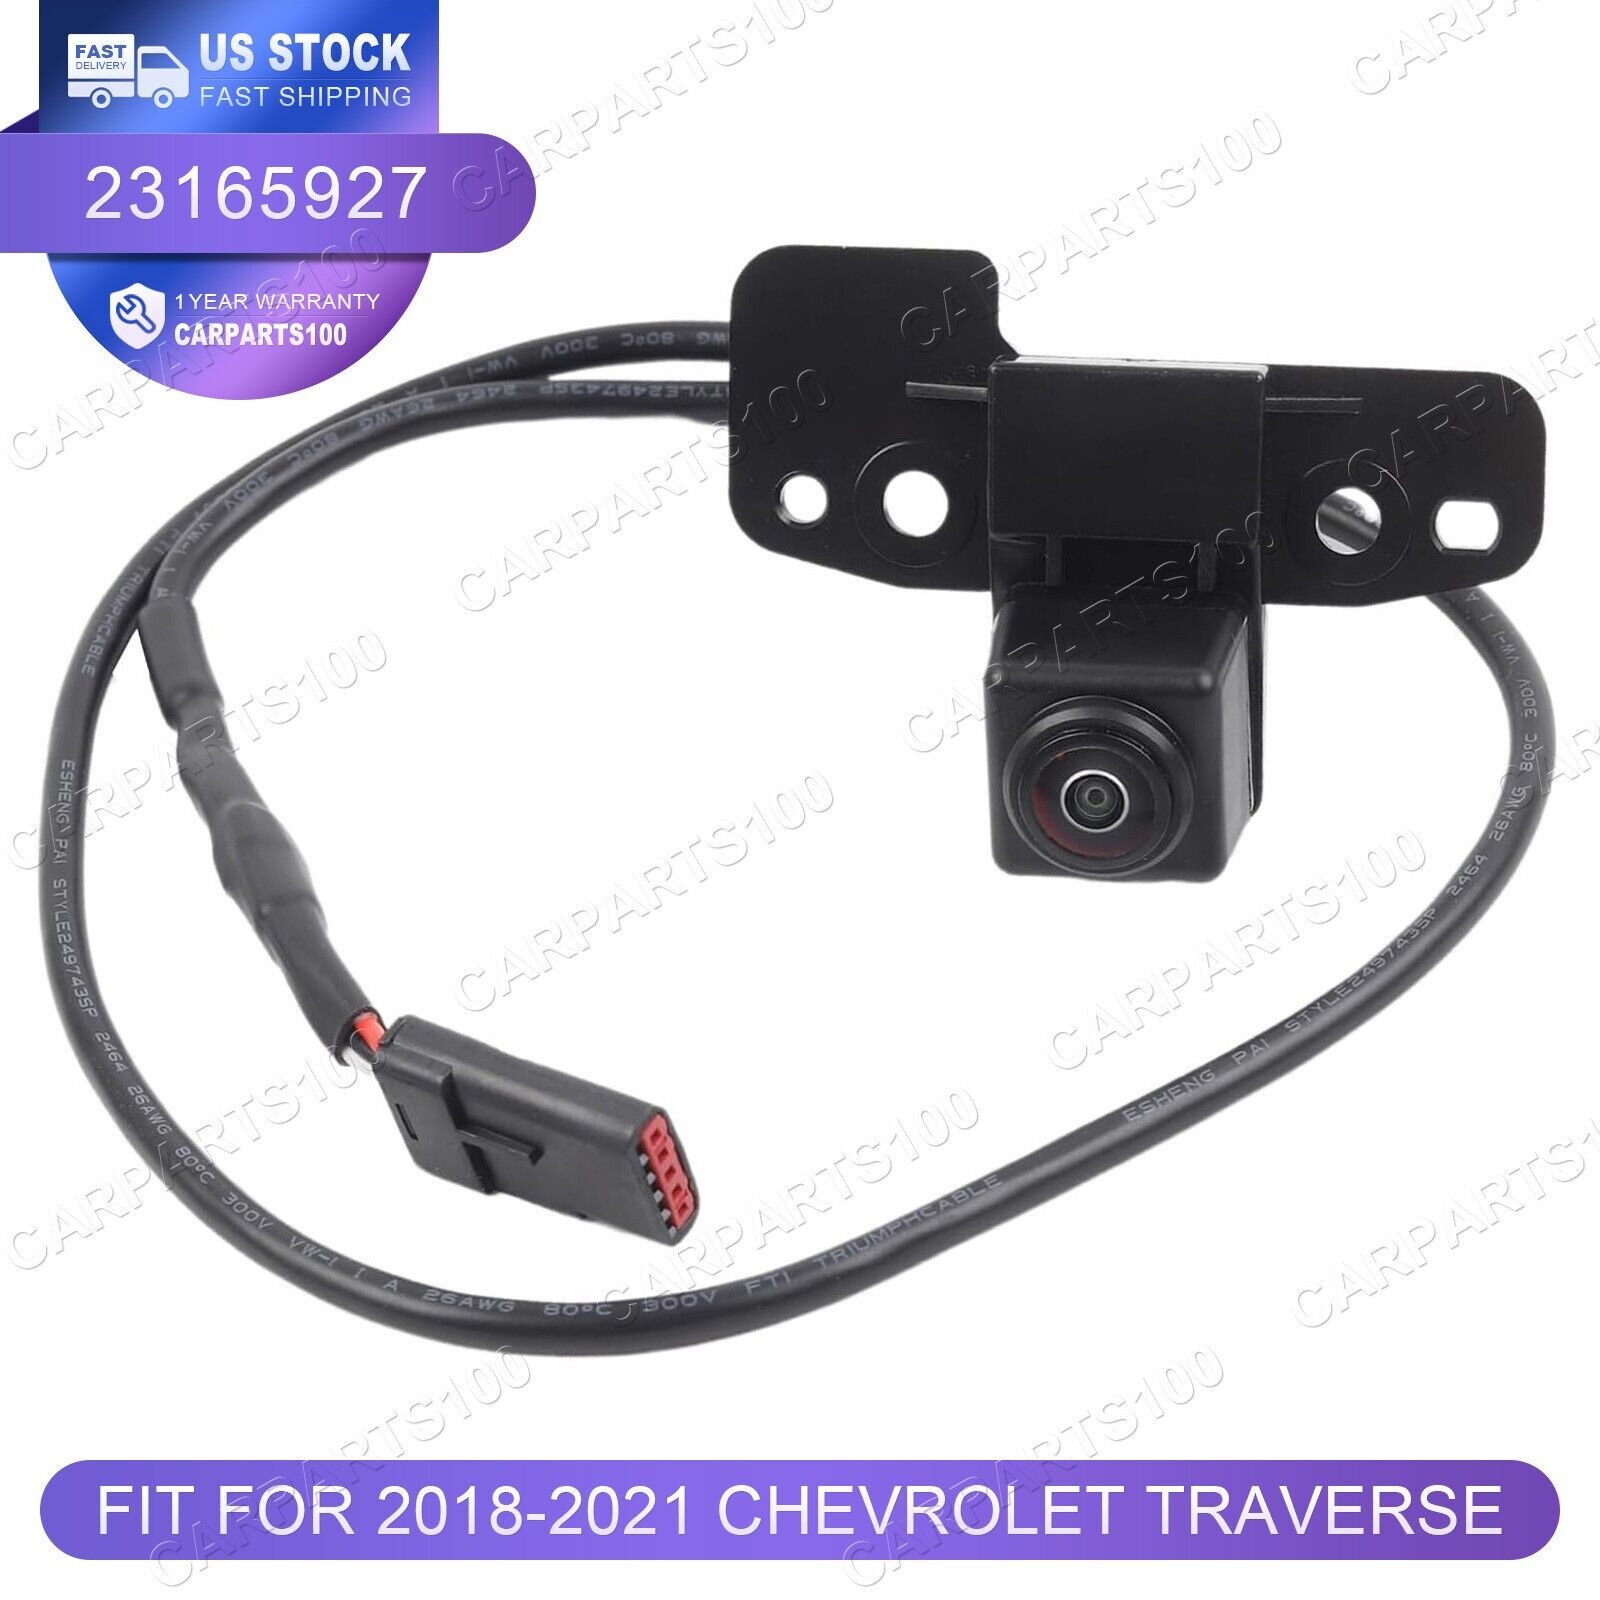 23165927 Front View Bumper Assist Camera Fit for 2018-2021 Chevrolet Traverse